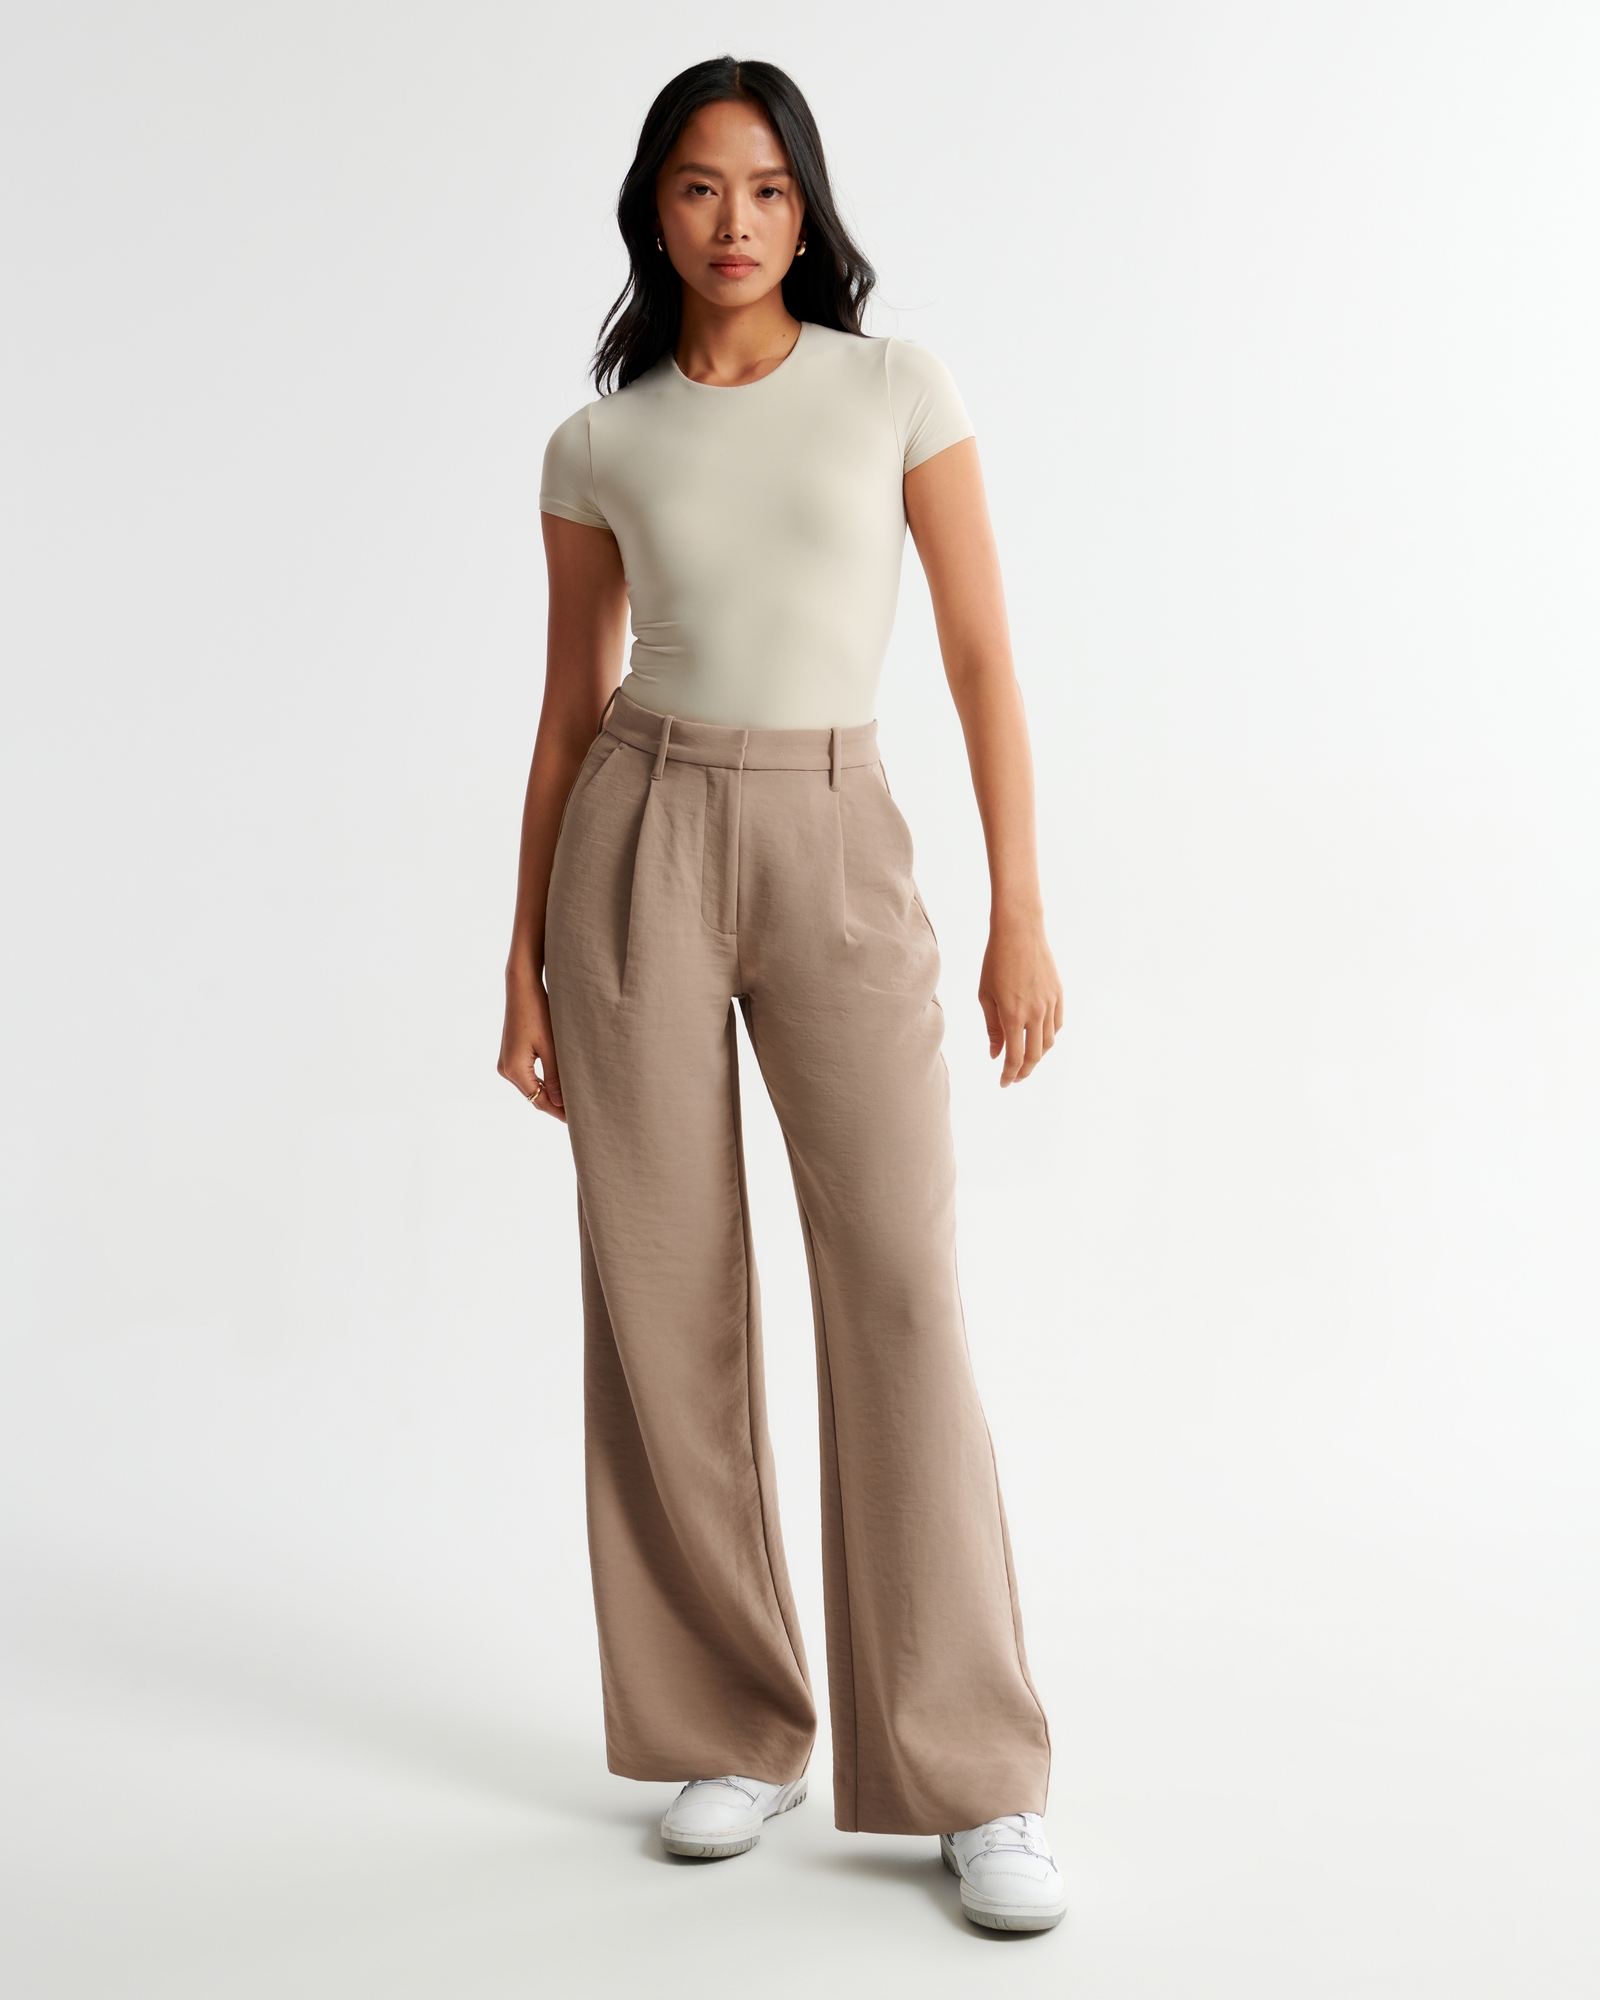 The Wide Leg Pant in Crepe